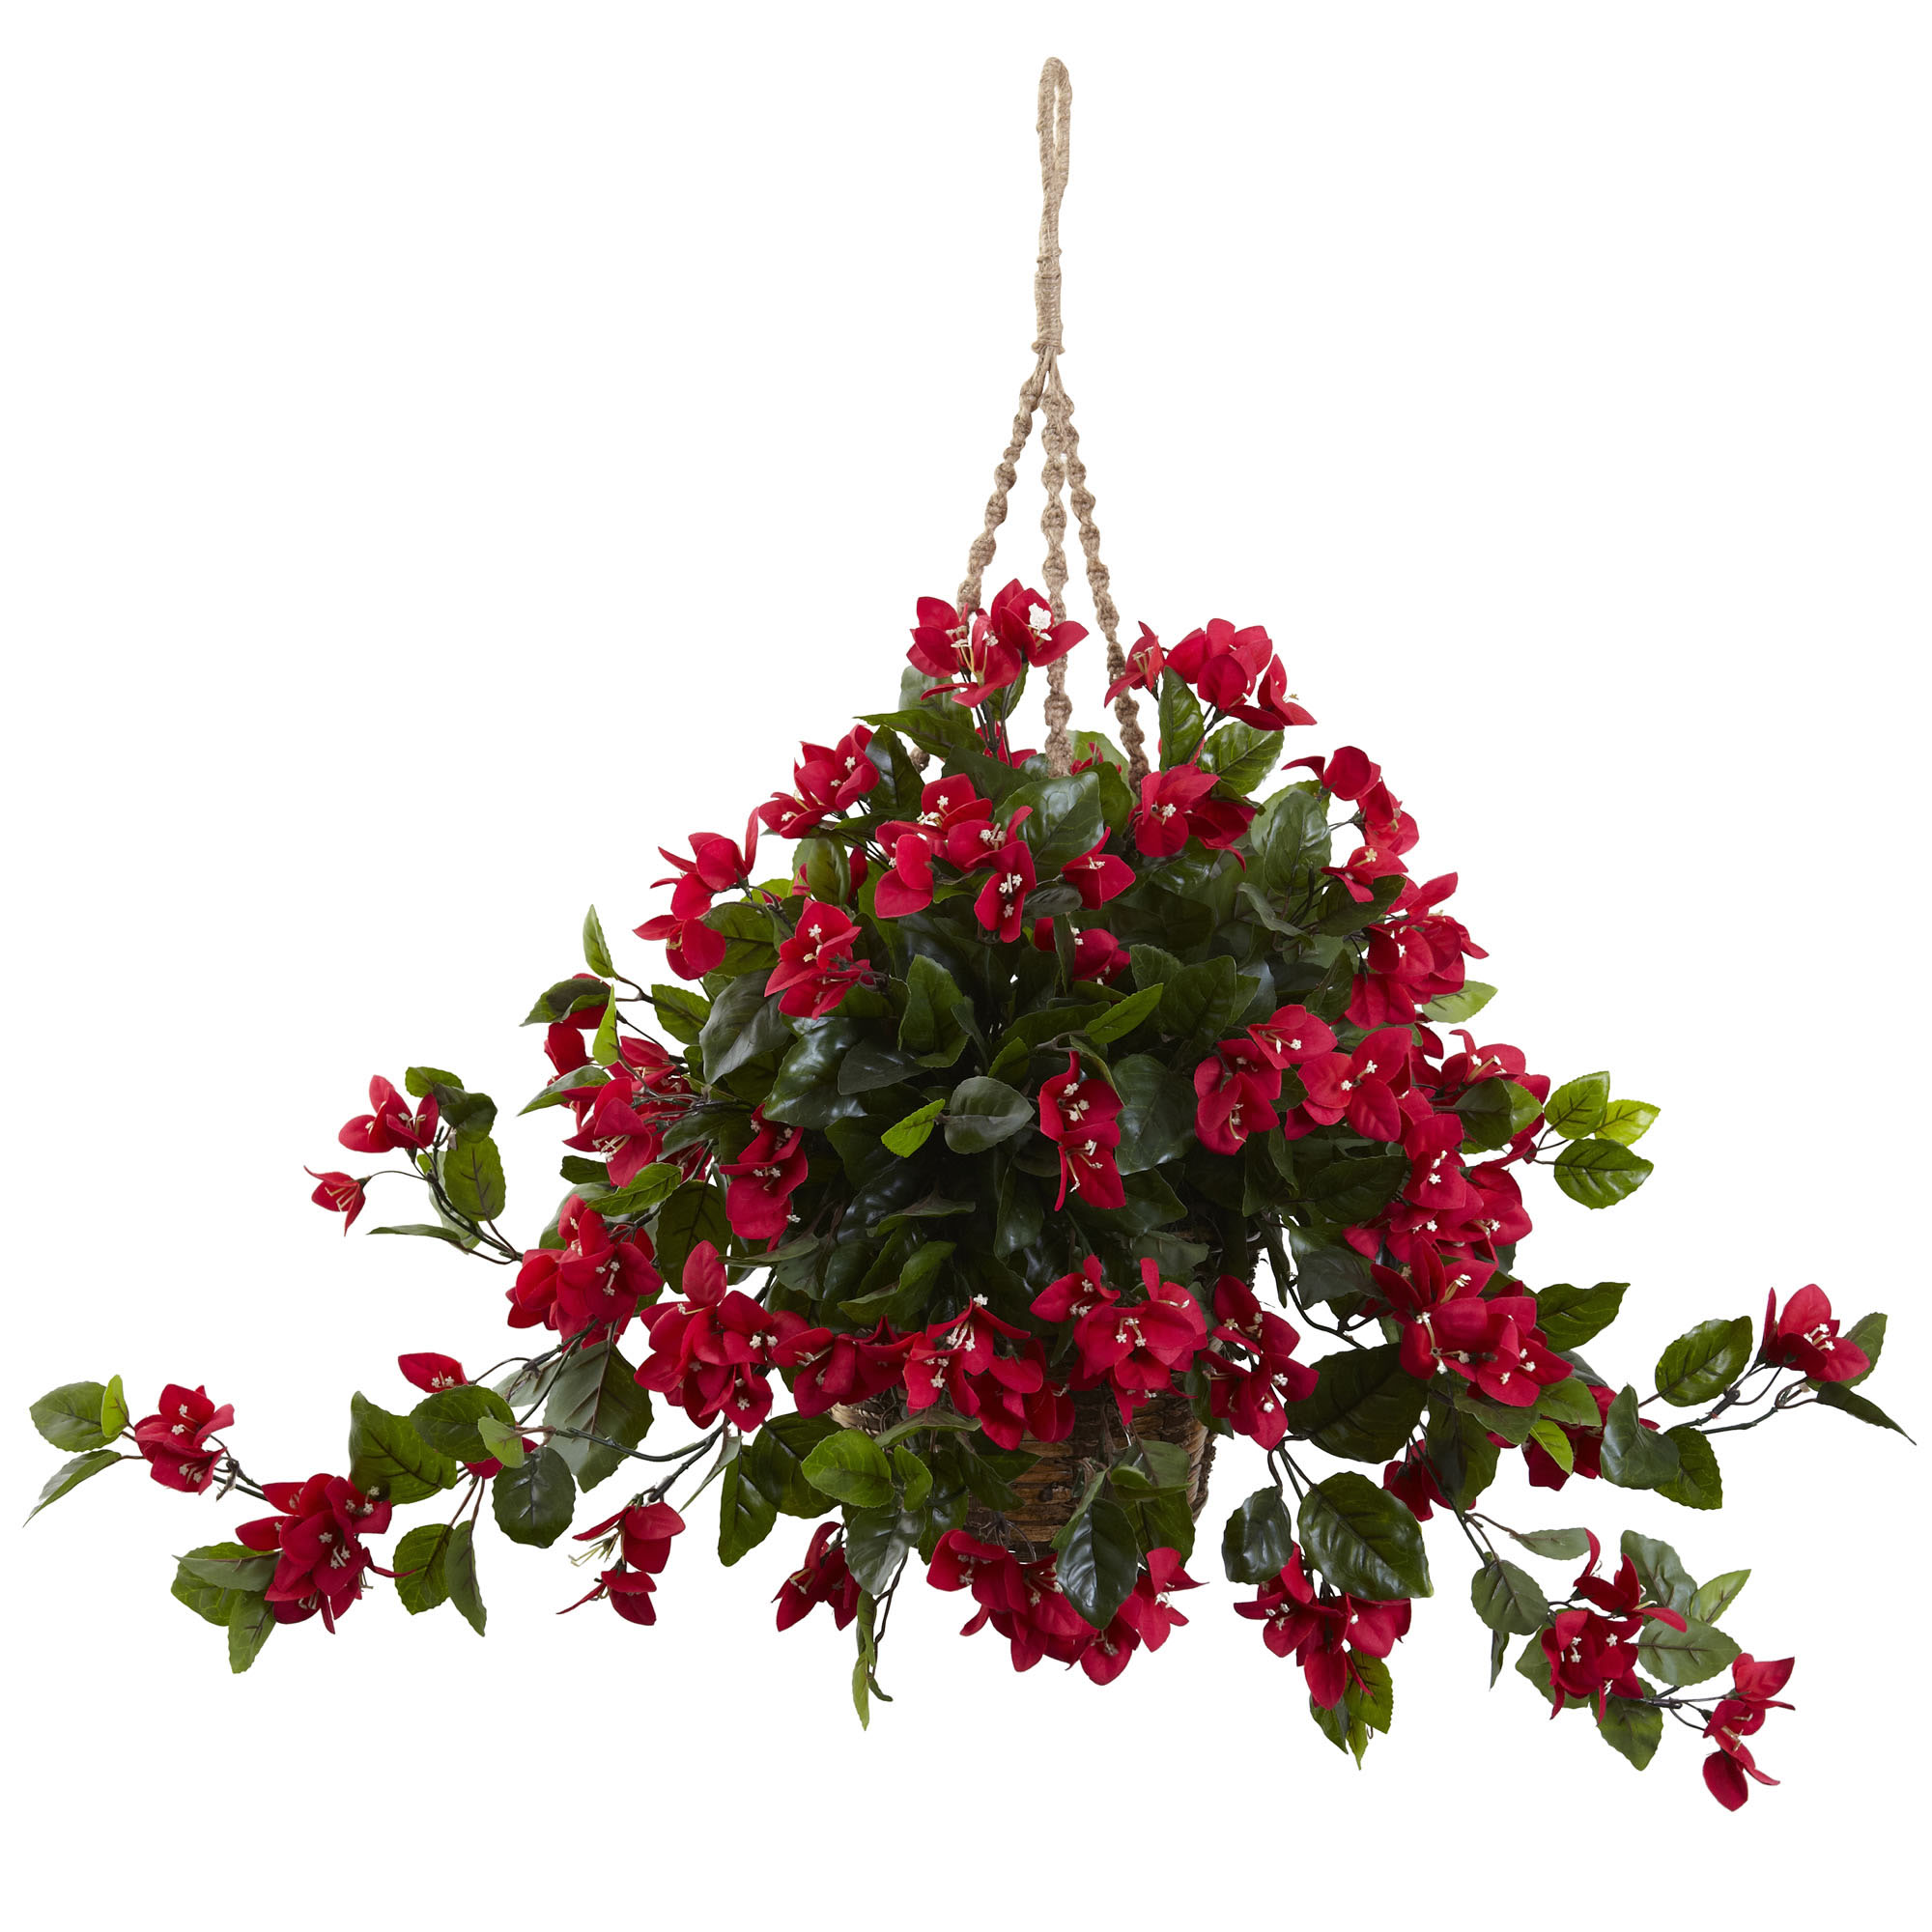 28 Inch Outdoor Bougainvillea In Hanging Basket: Limited Uv